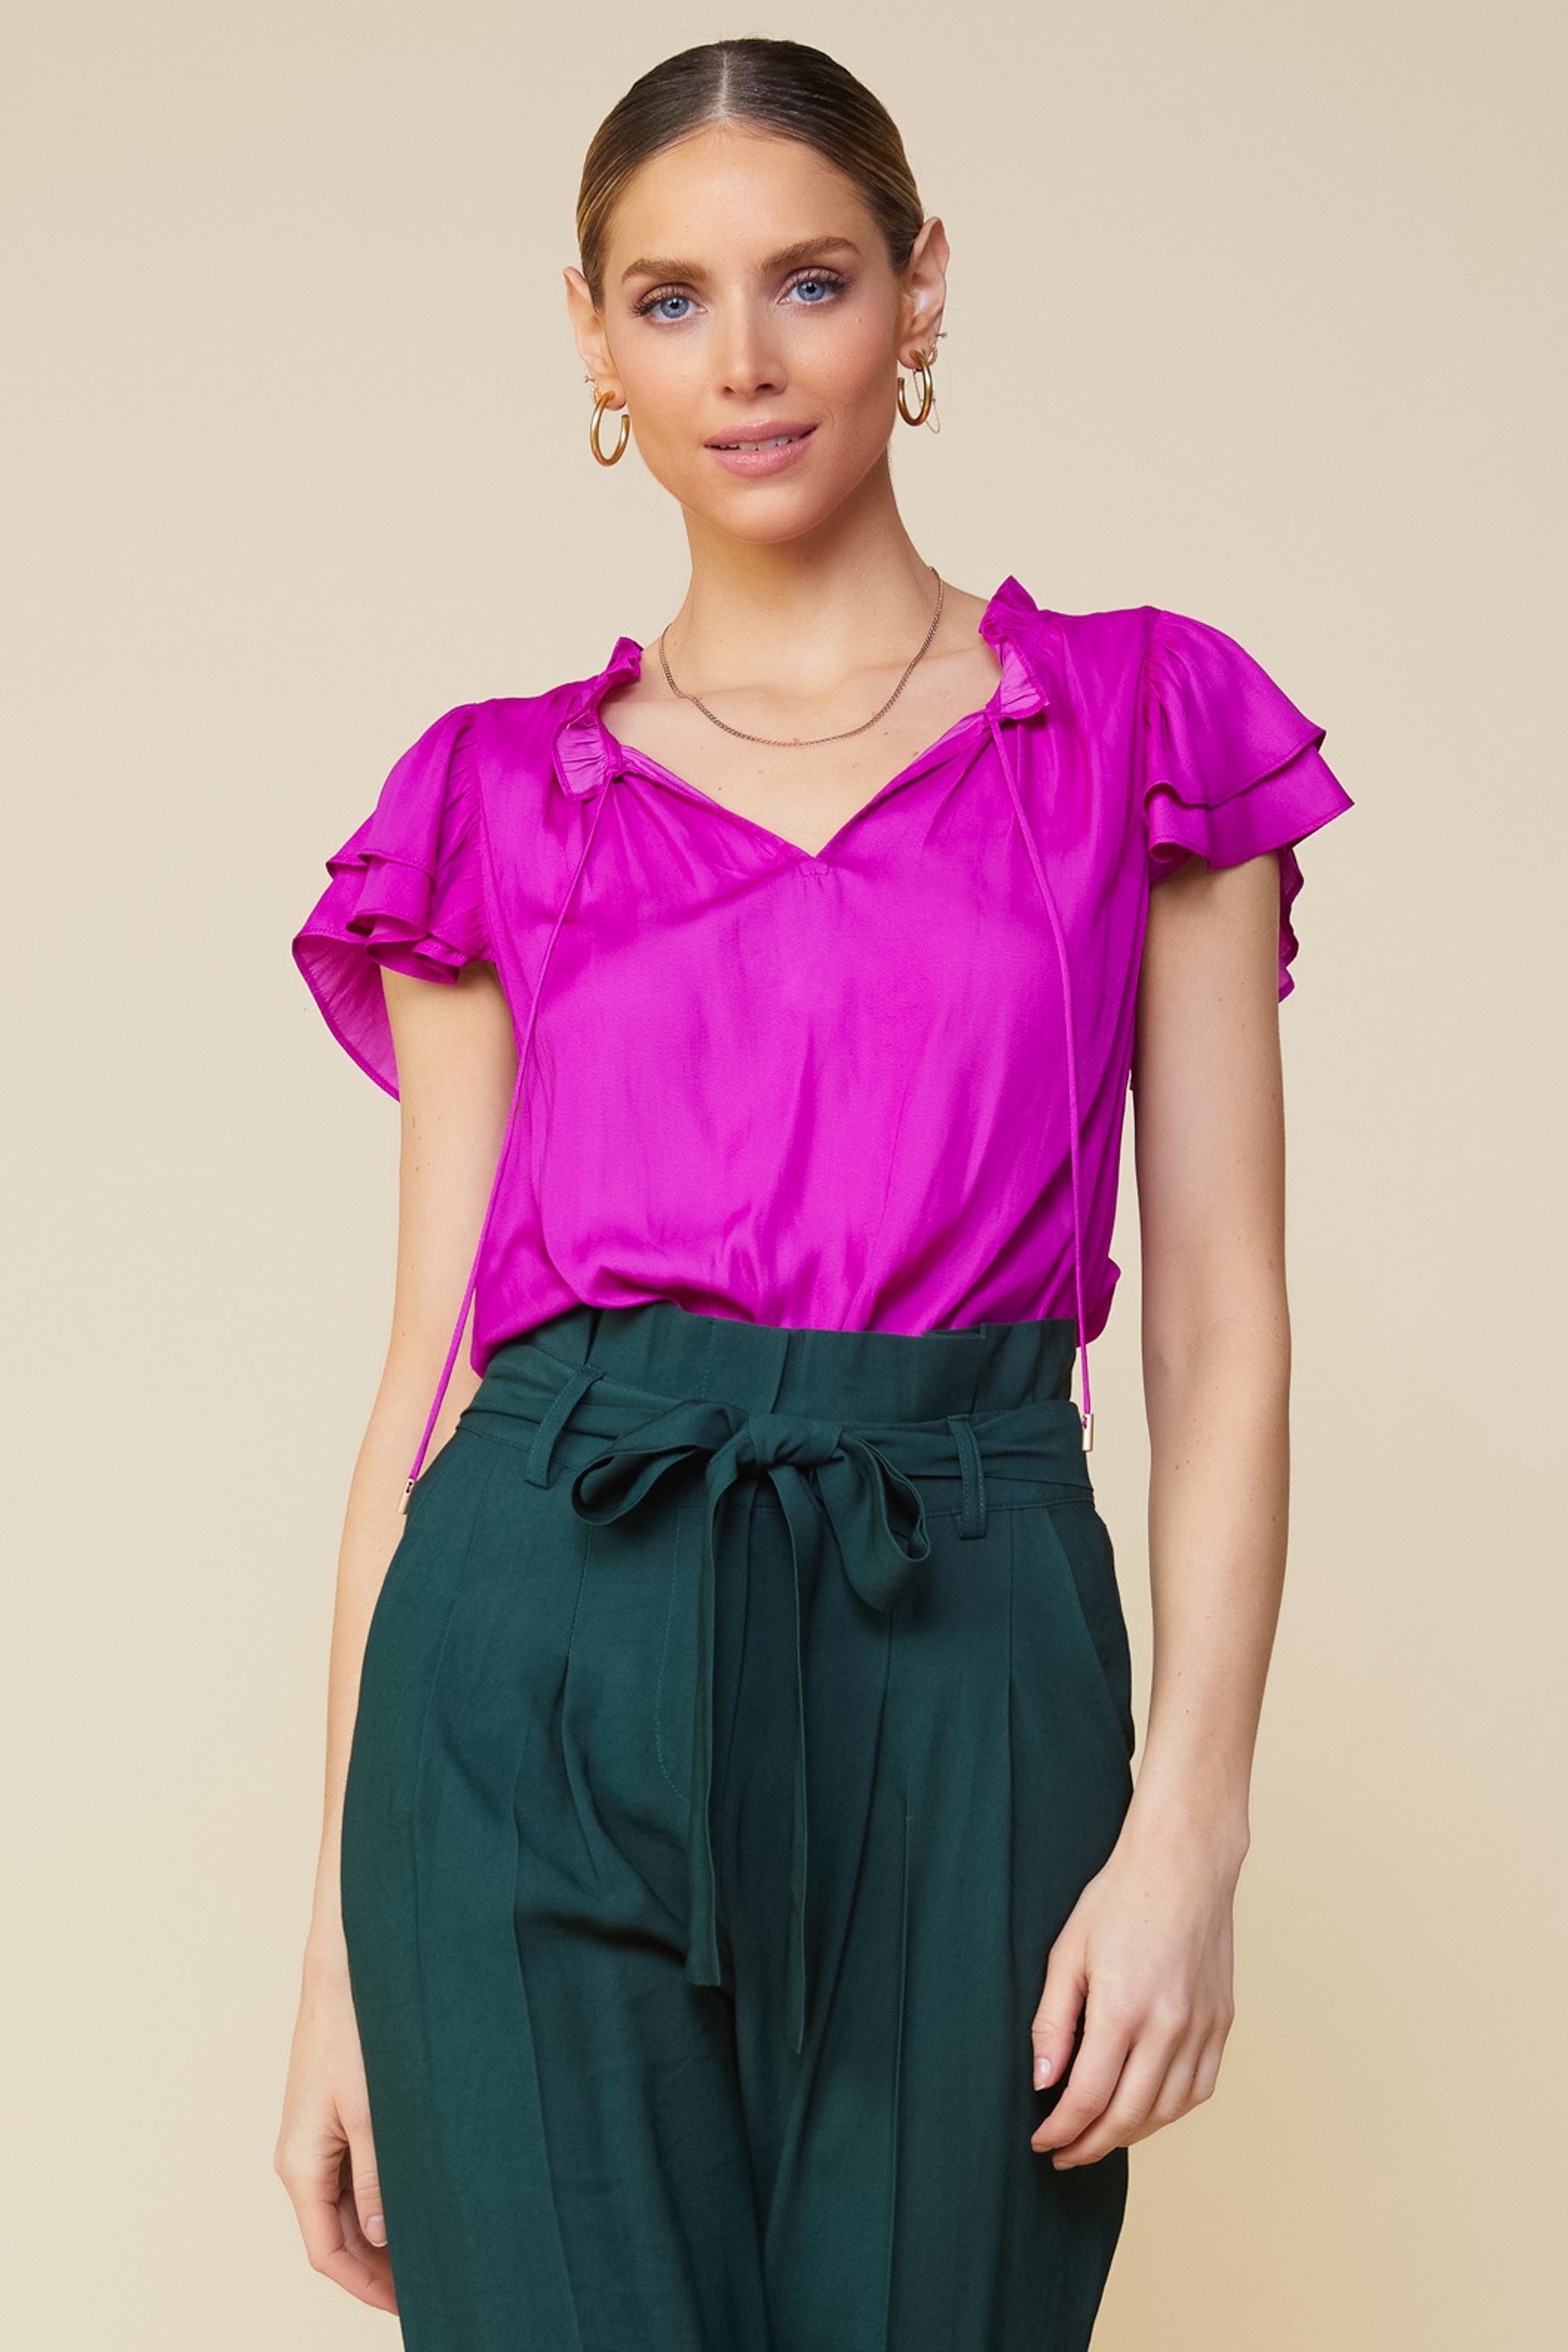 Skies are Blue Sweet and Sassy Top - Orchid, tie v- neck, ruffle collar, double flutter sleeves, curvy